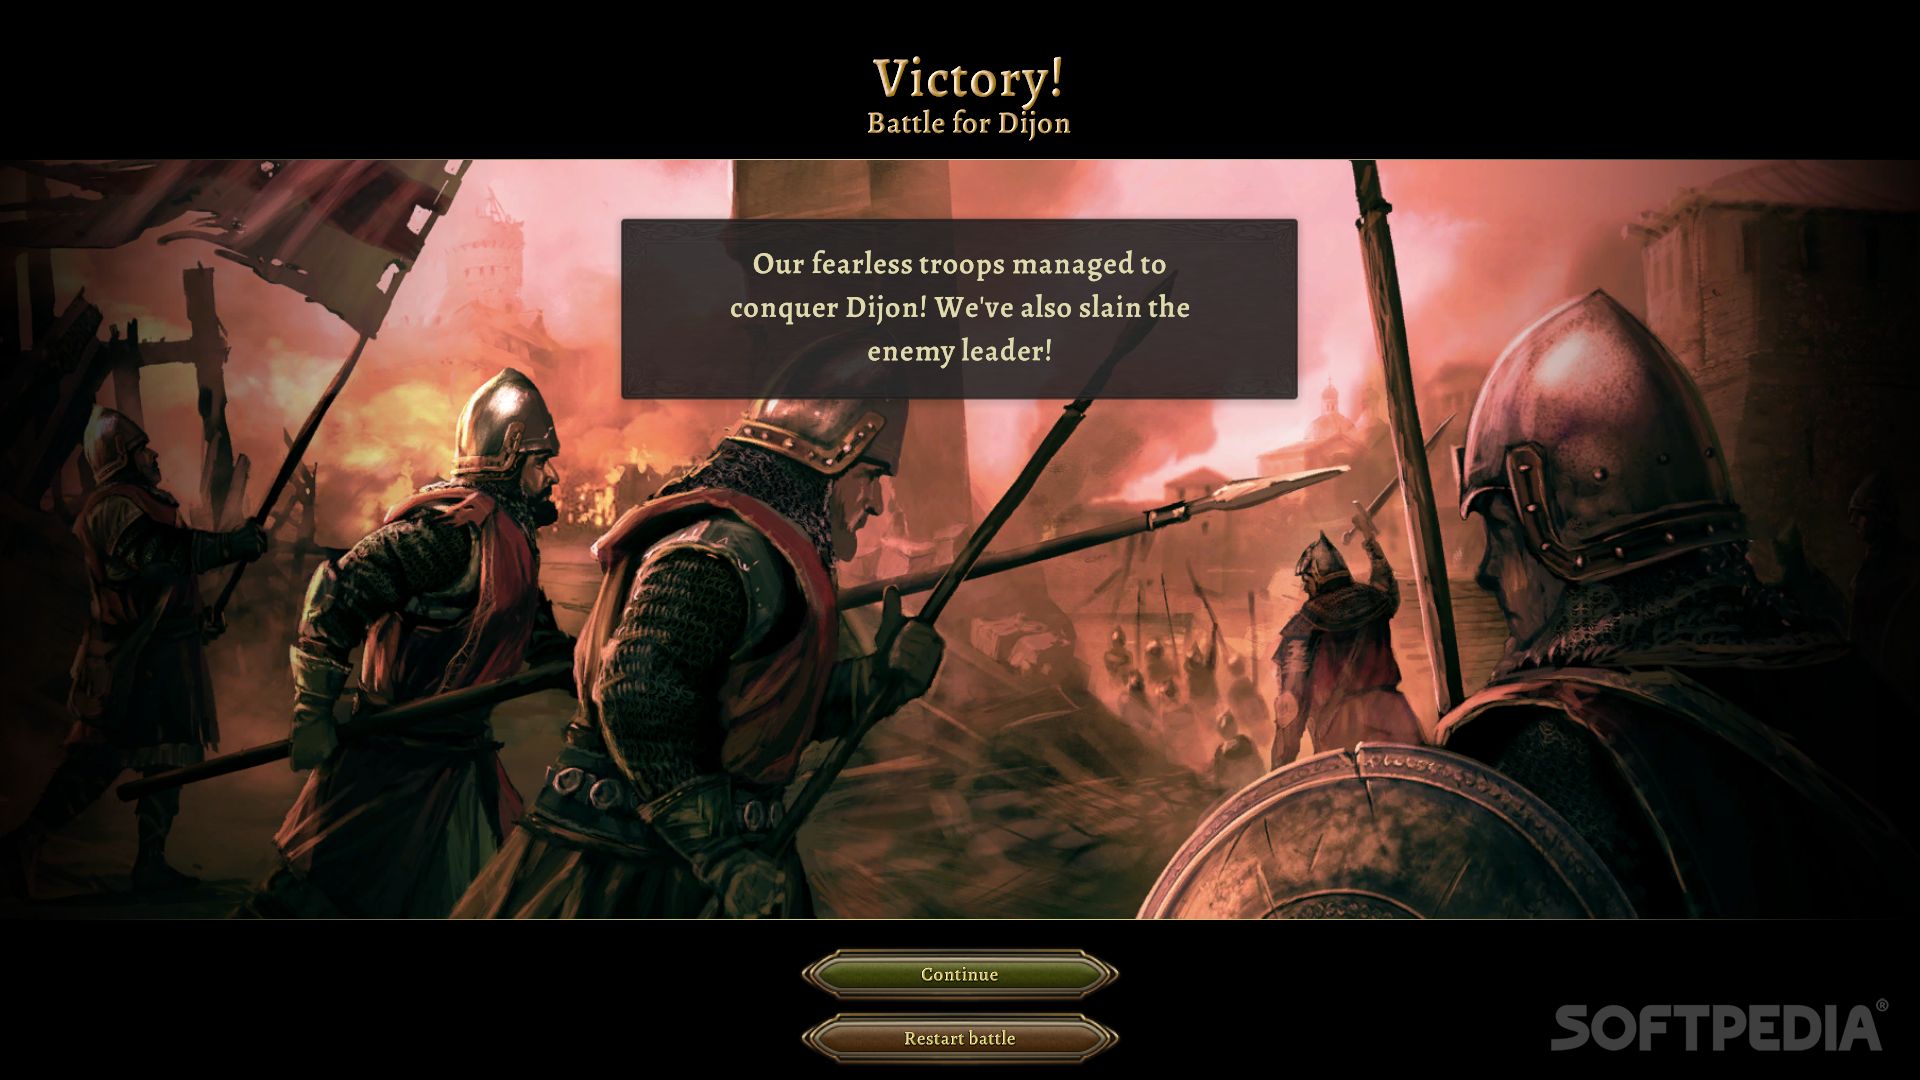 Tutorials, Tips and Explanations! :: Knights of Honor II: Sovereign General  Discussions